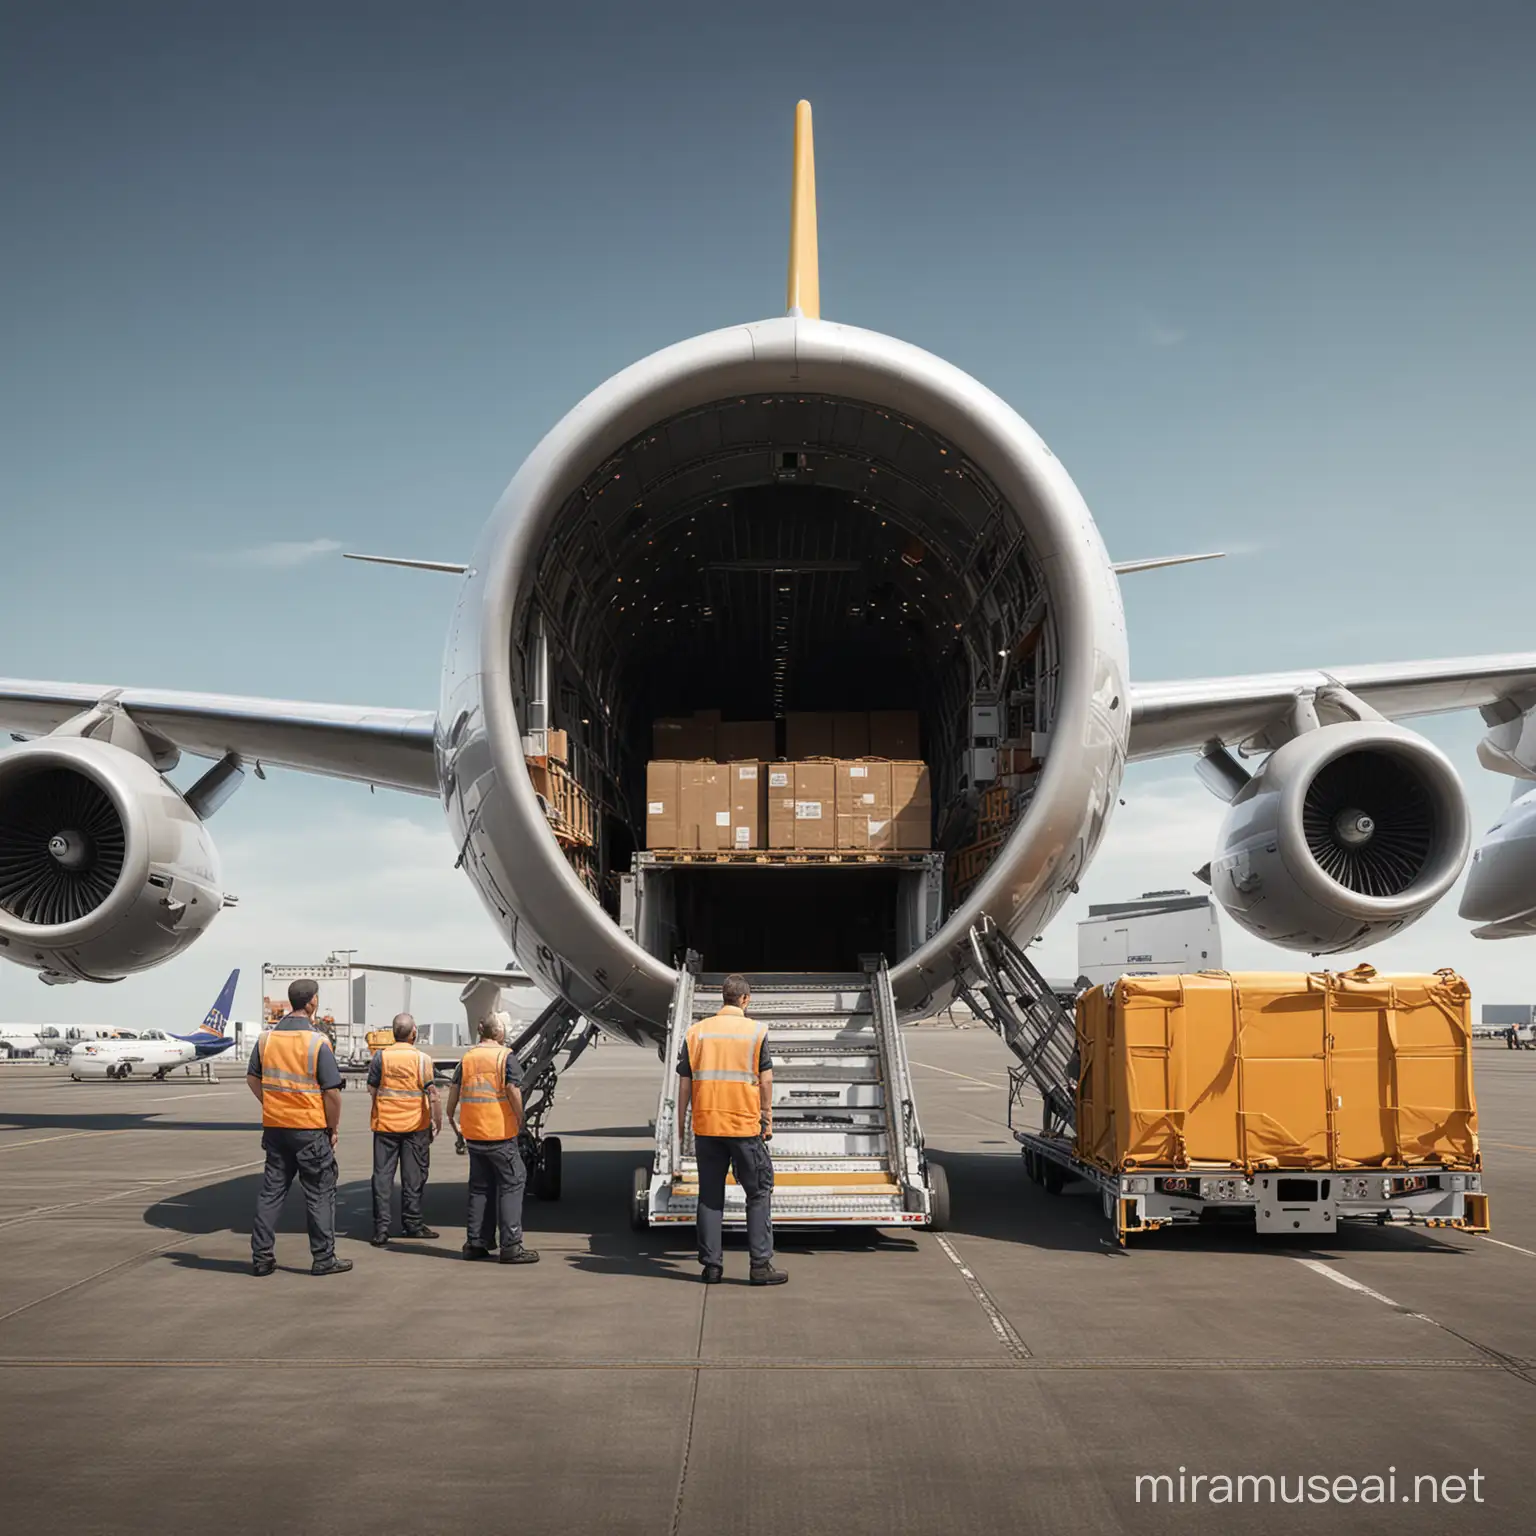 Airplane Loading Cargo Ground Crew Members in Safety Vests